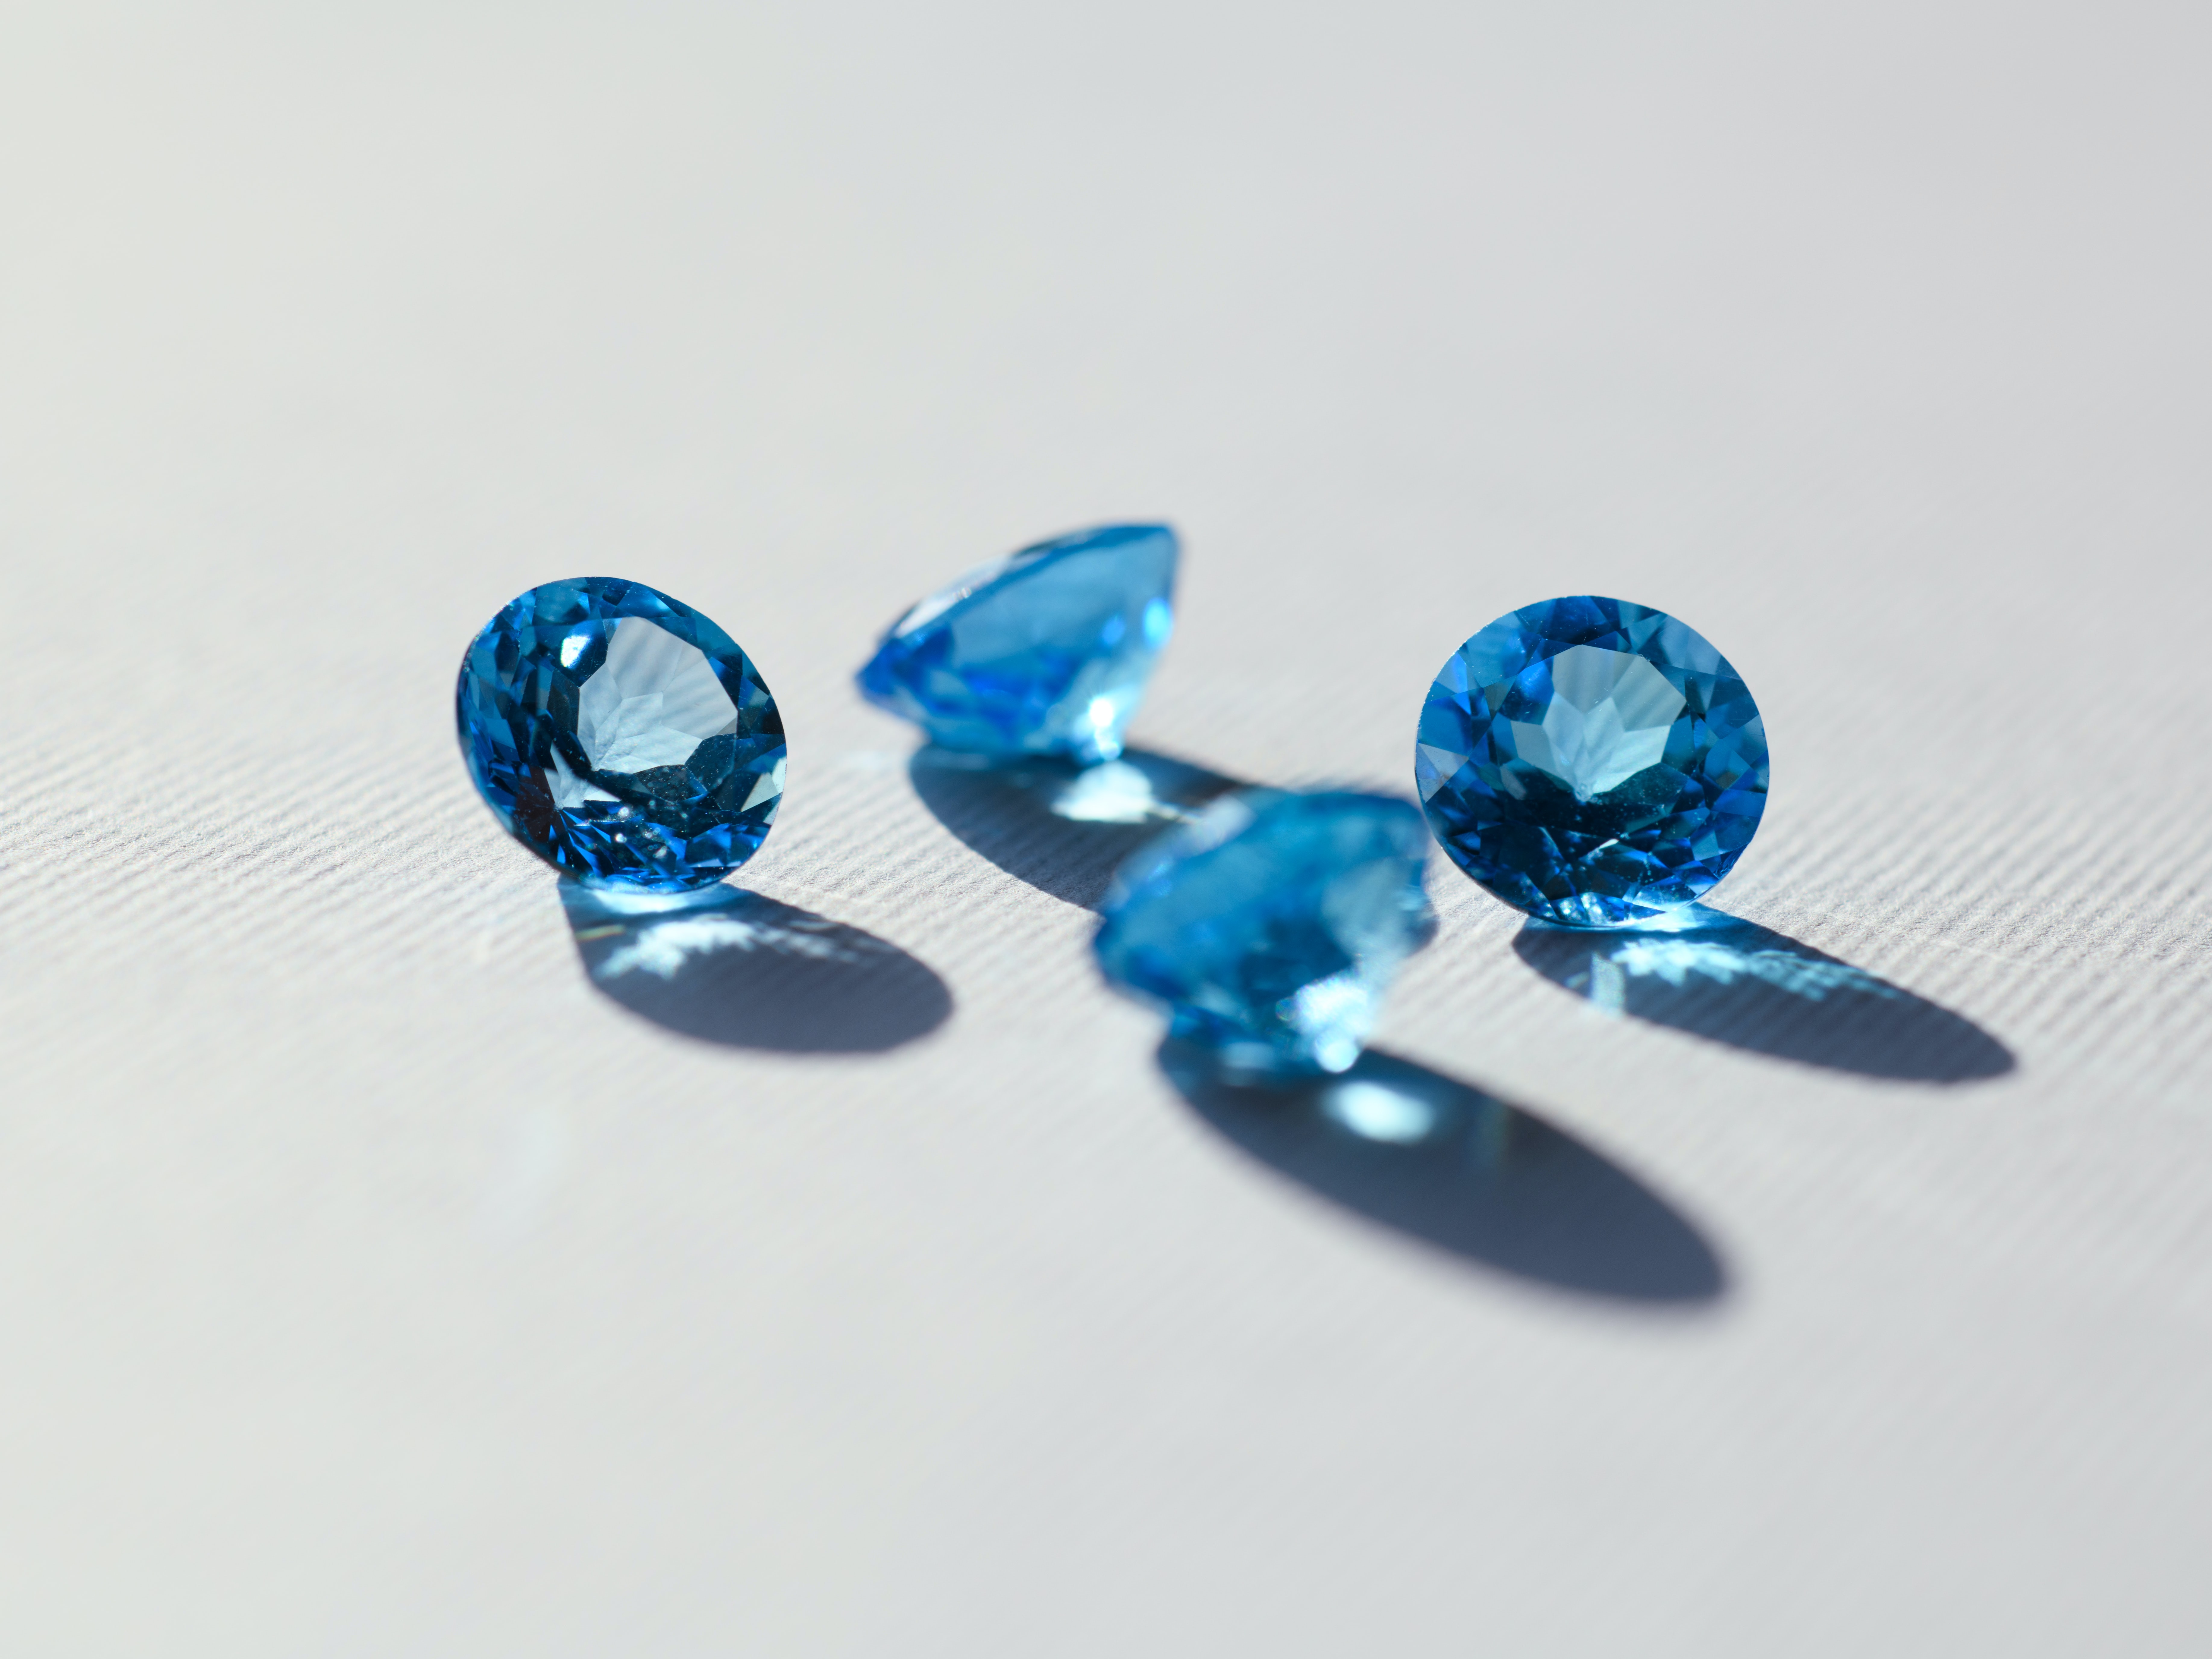 Blue Sapphire Spiritual Meaning - The Power Of The Blue Gem